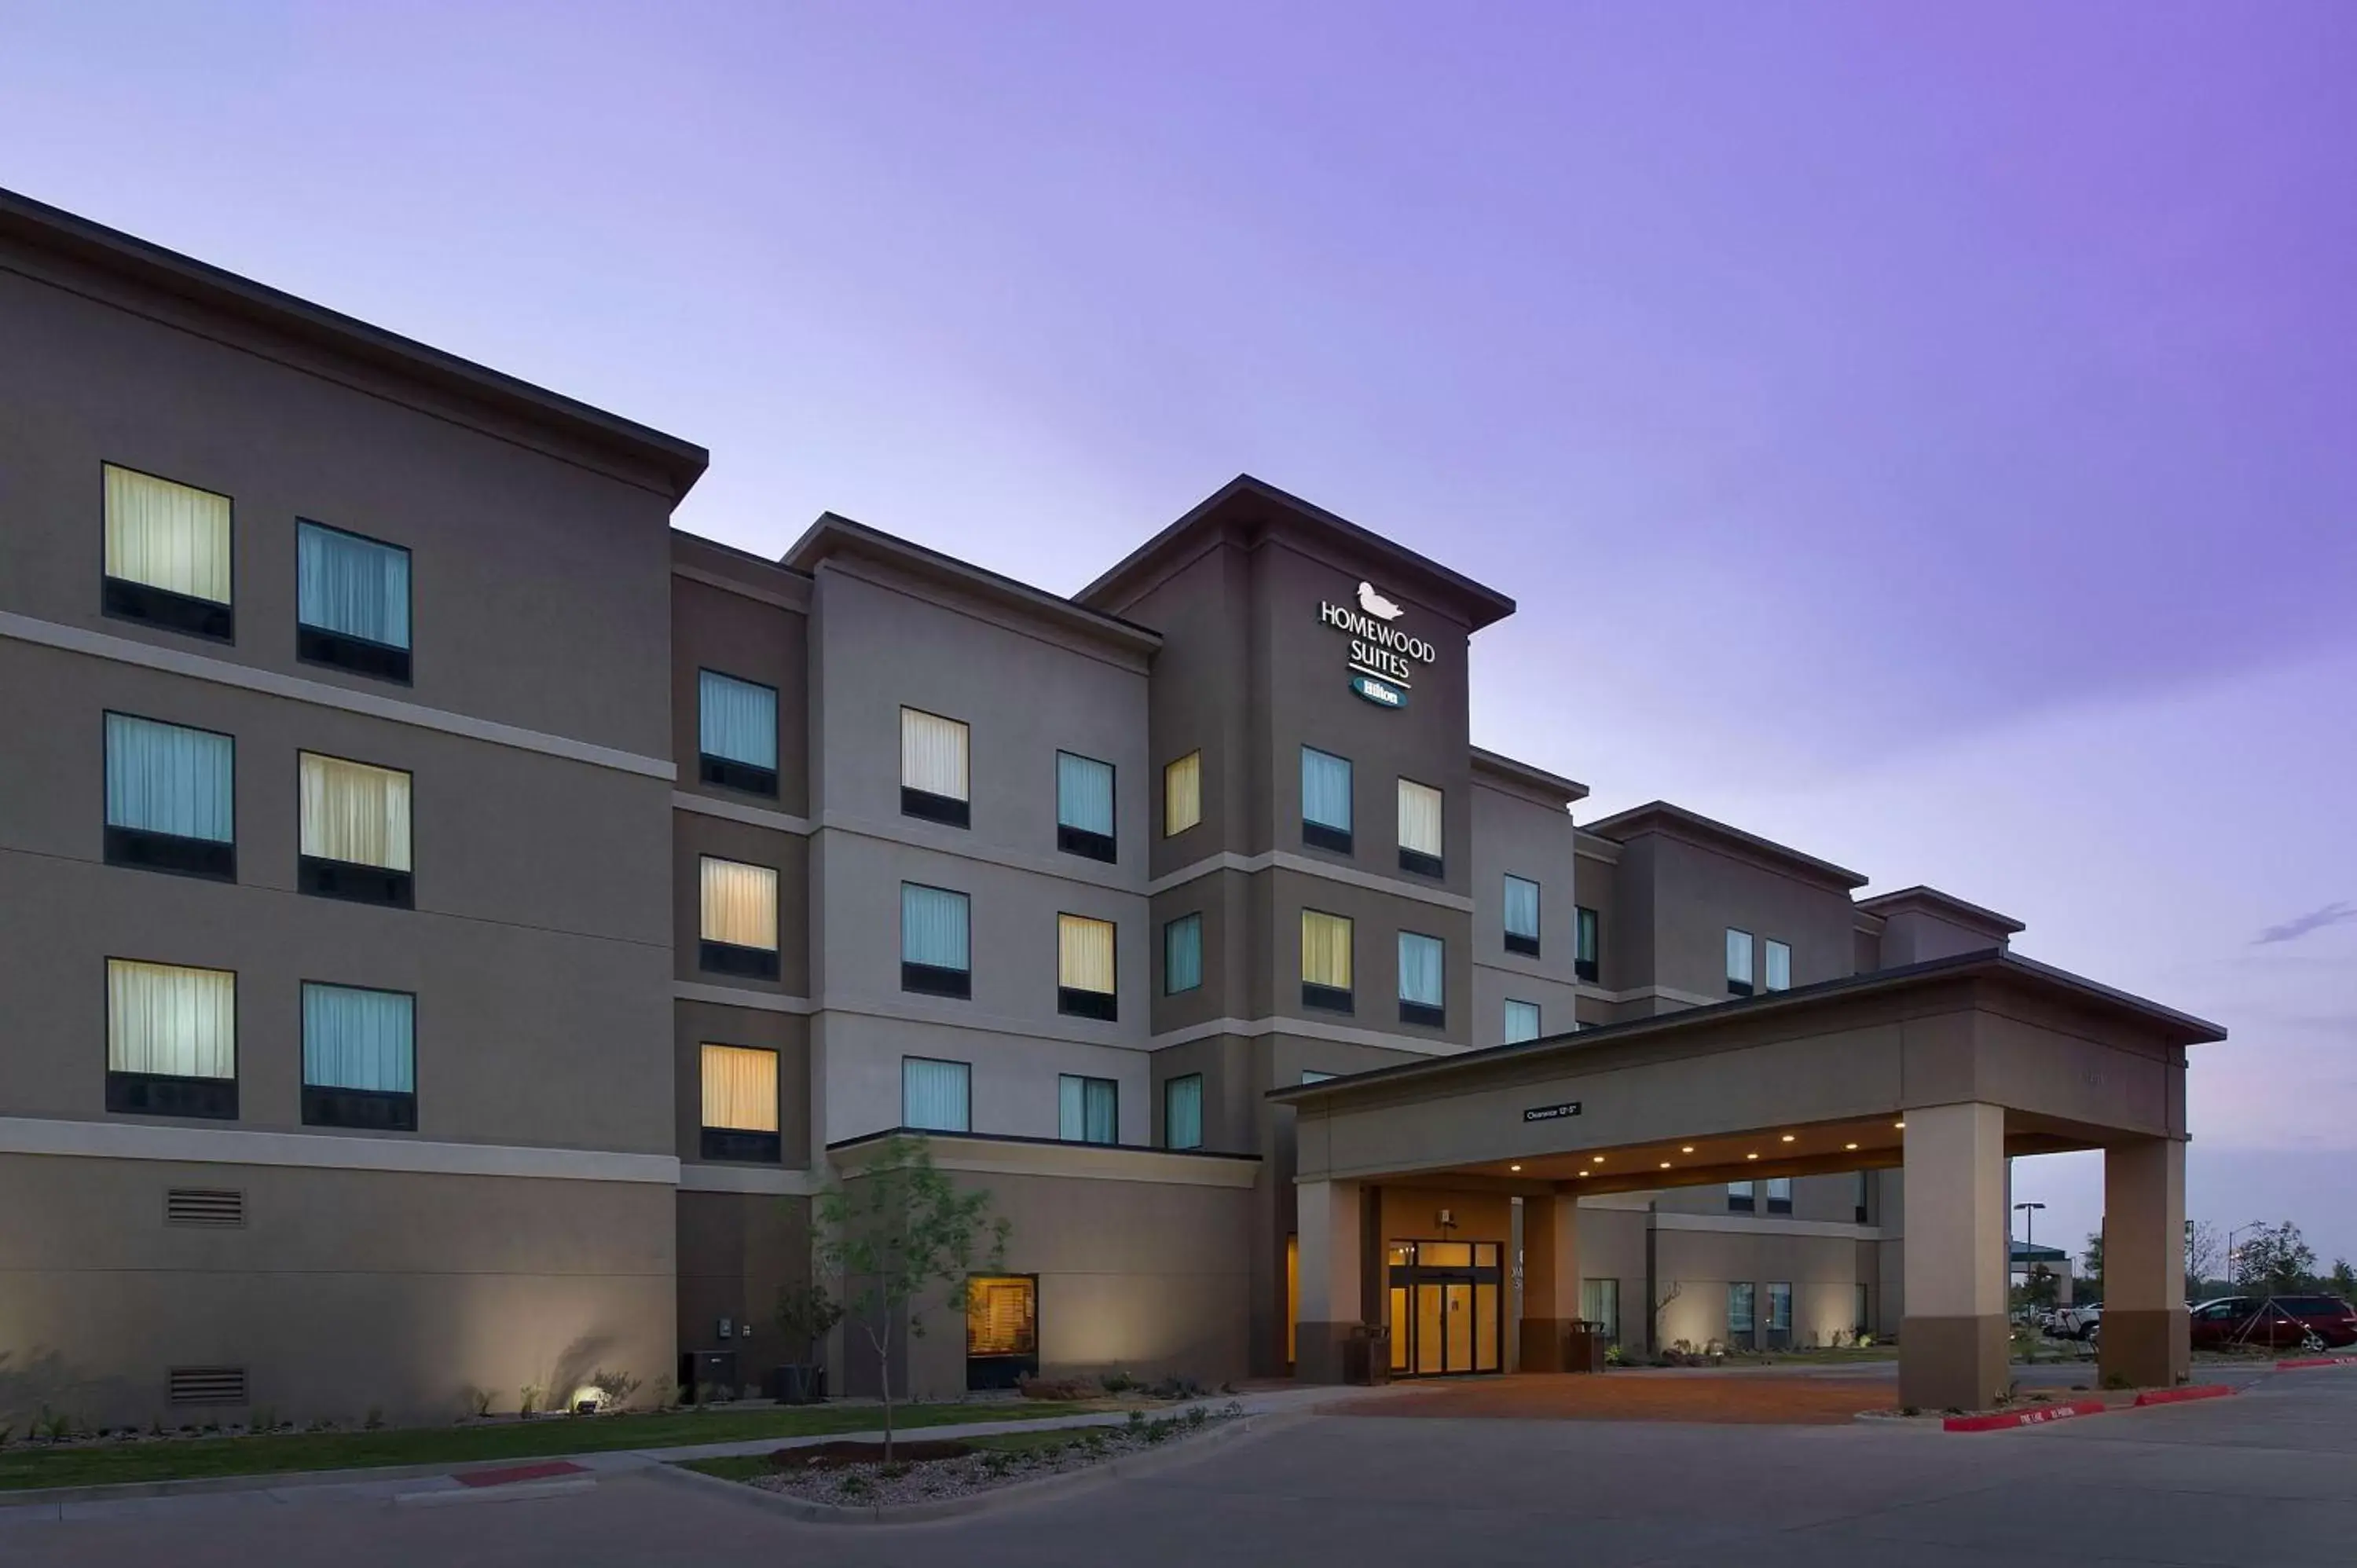 Property Building in Homewood Suites by Hilton Midland